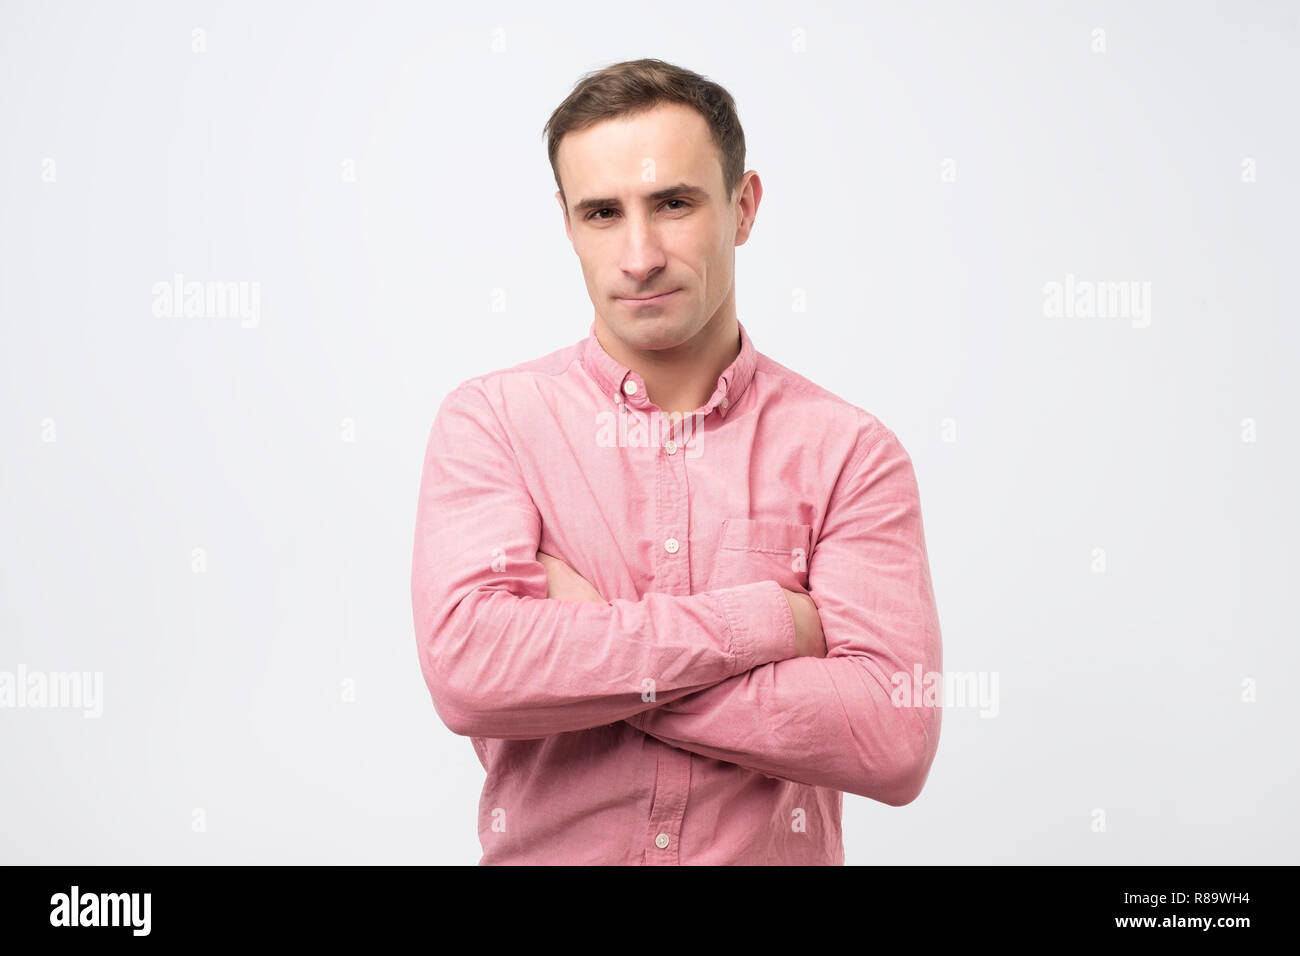 Sad unhappy young man in pink shirt has grumpy expression after quarrel with wife. Stock Photo